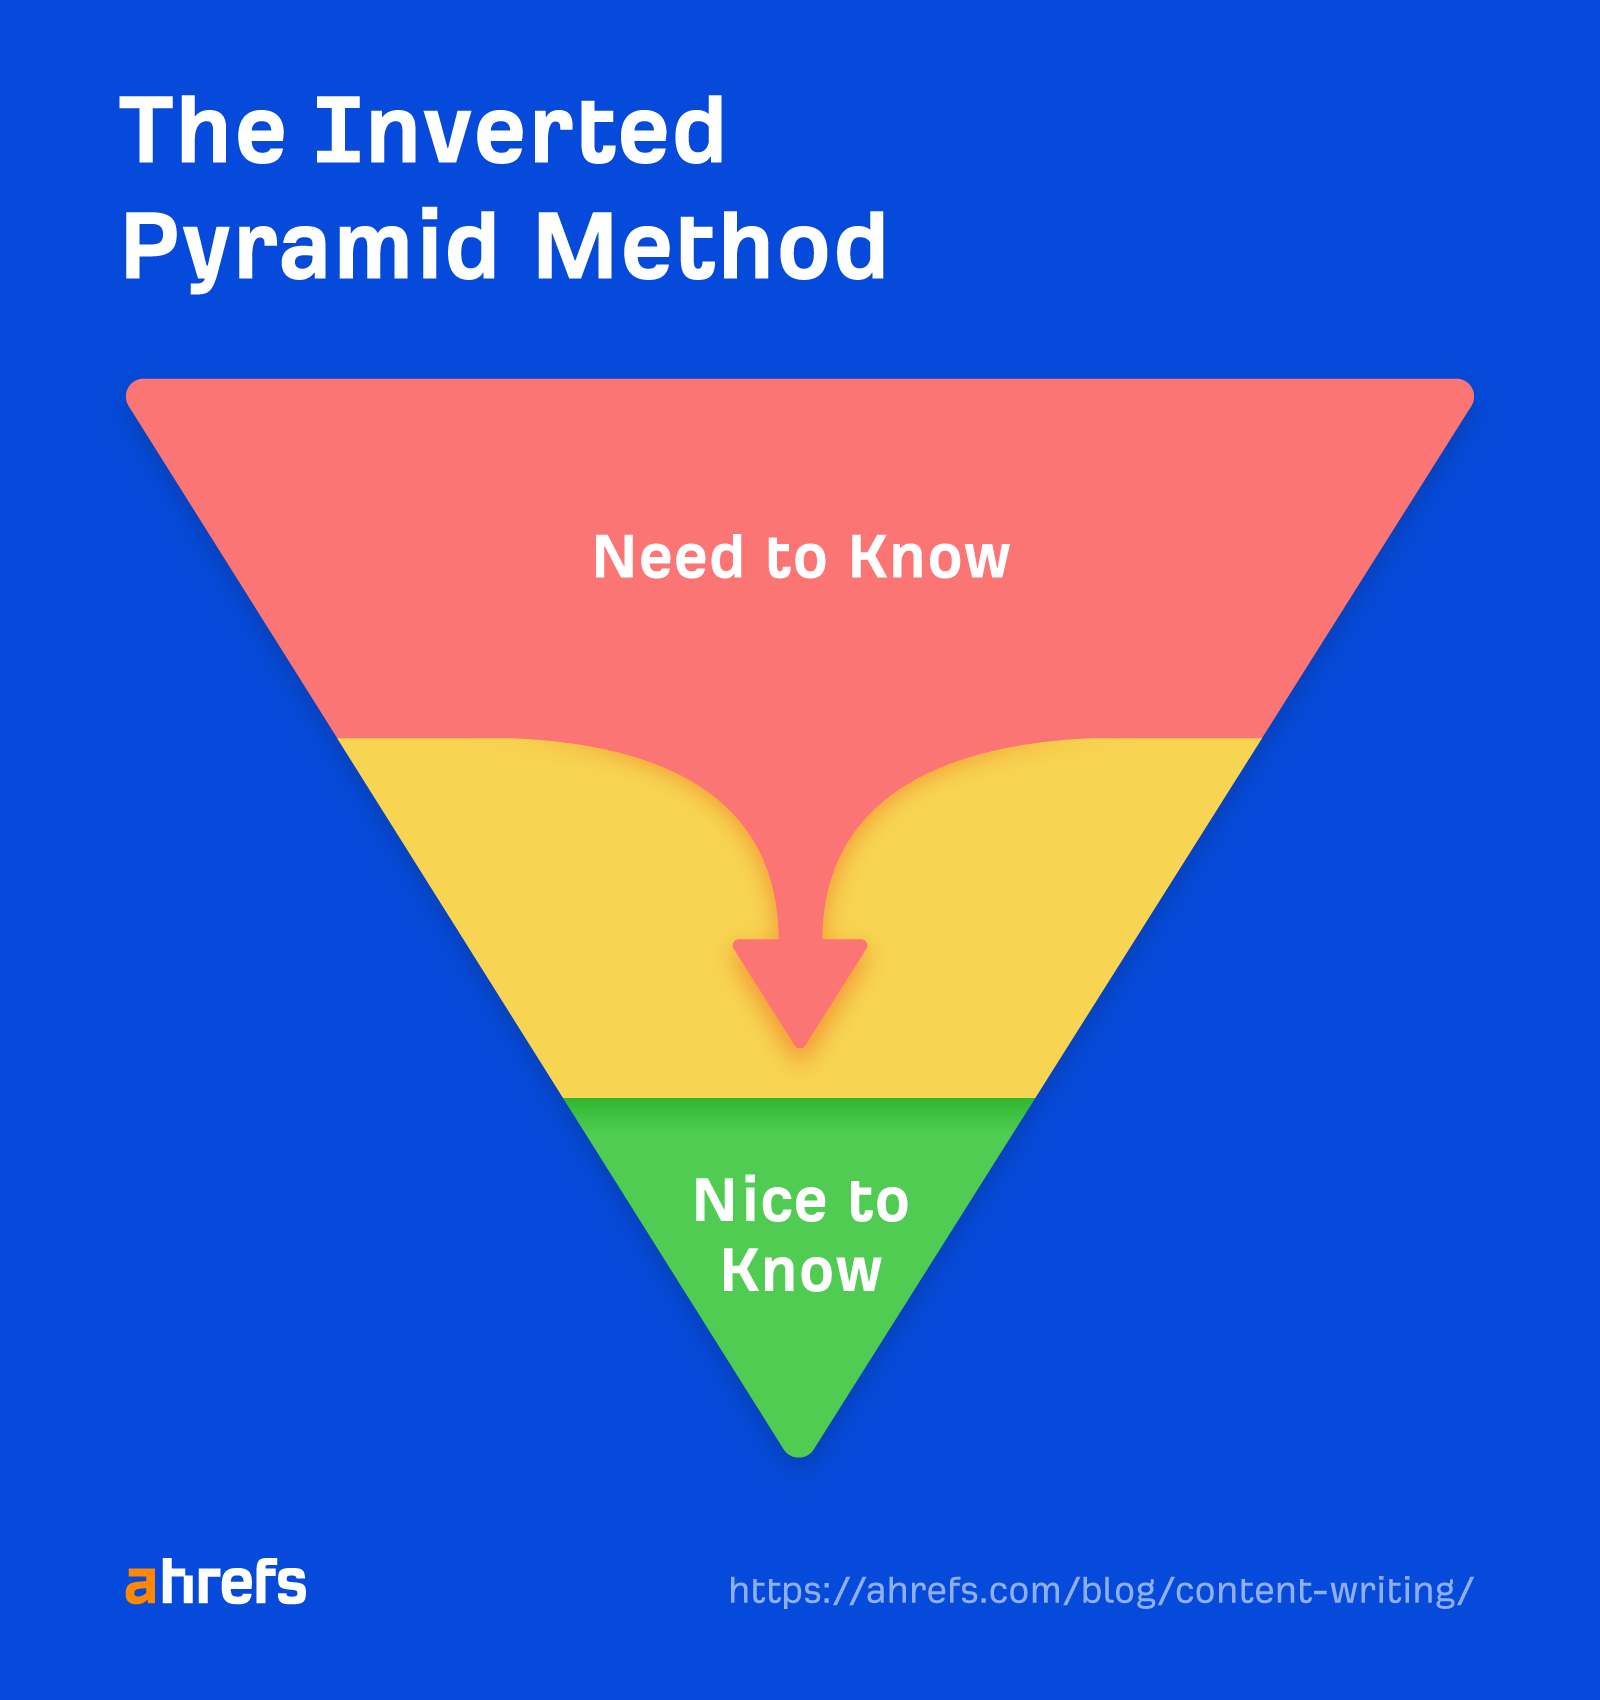 Use the "inverted pyramid" method to put the "need to know" before the "nice to know"